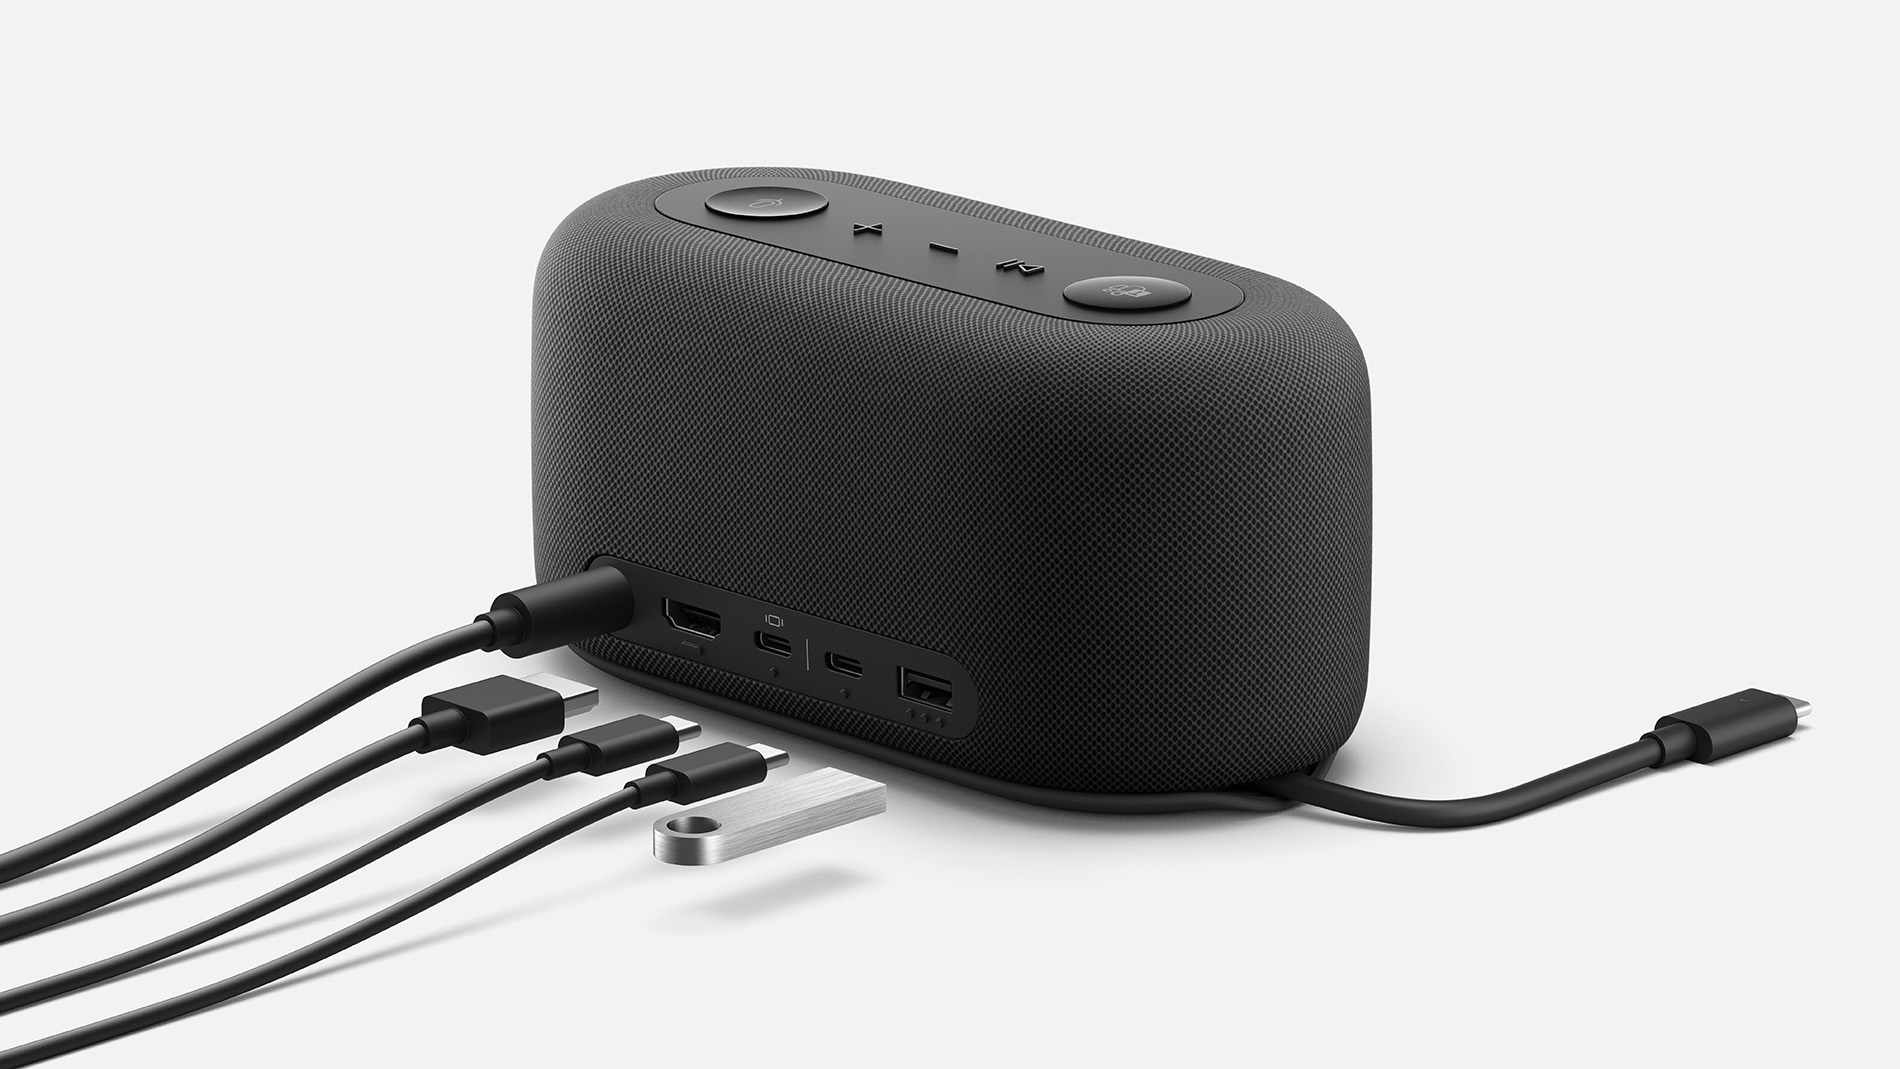 Microsoft Audio Dock ports and buttons